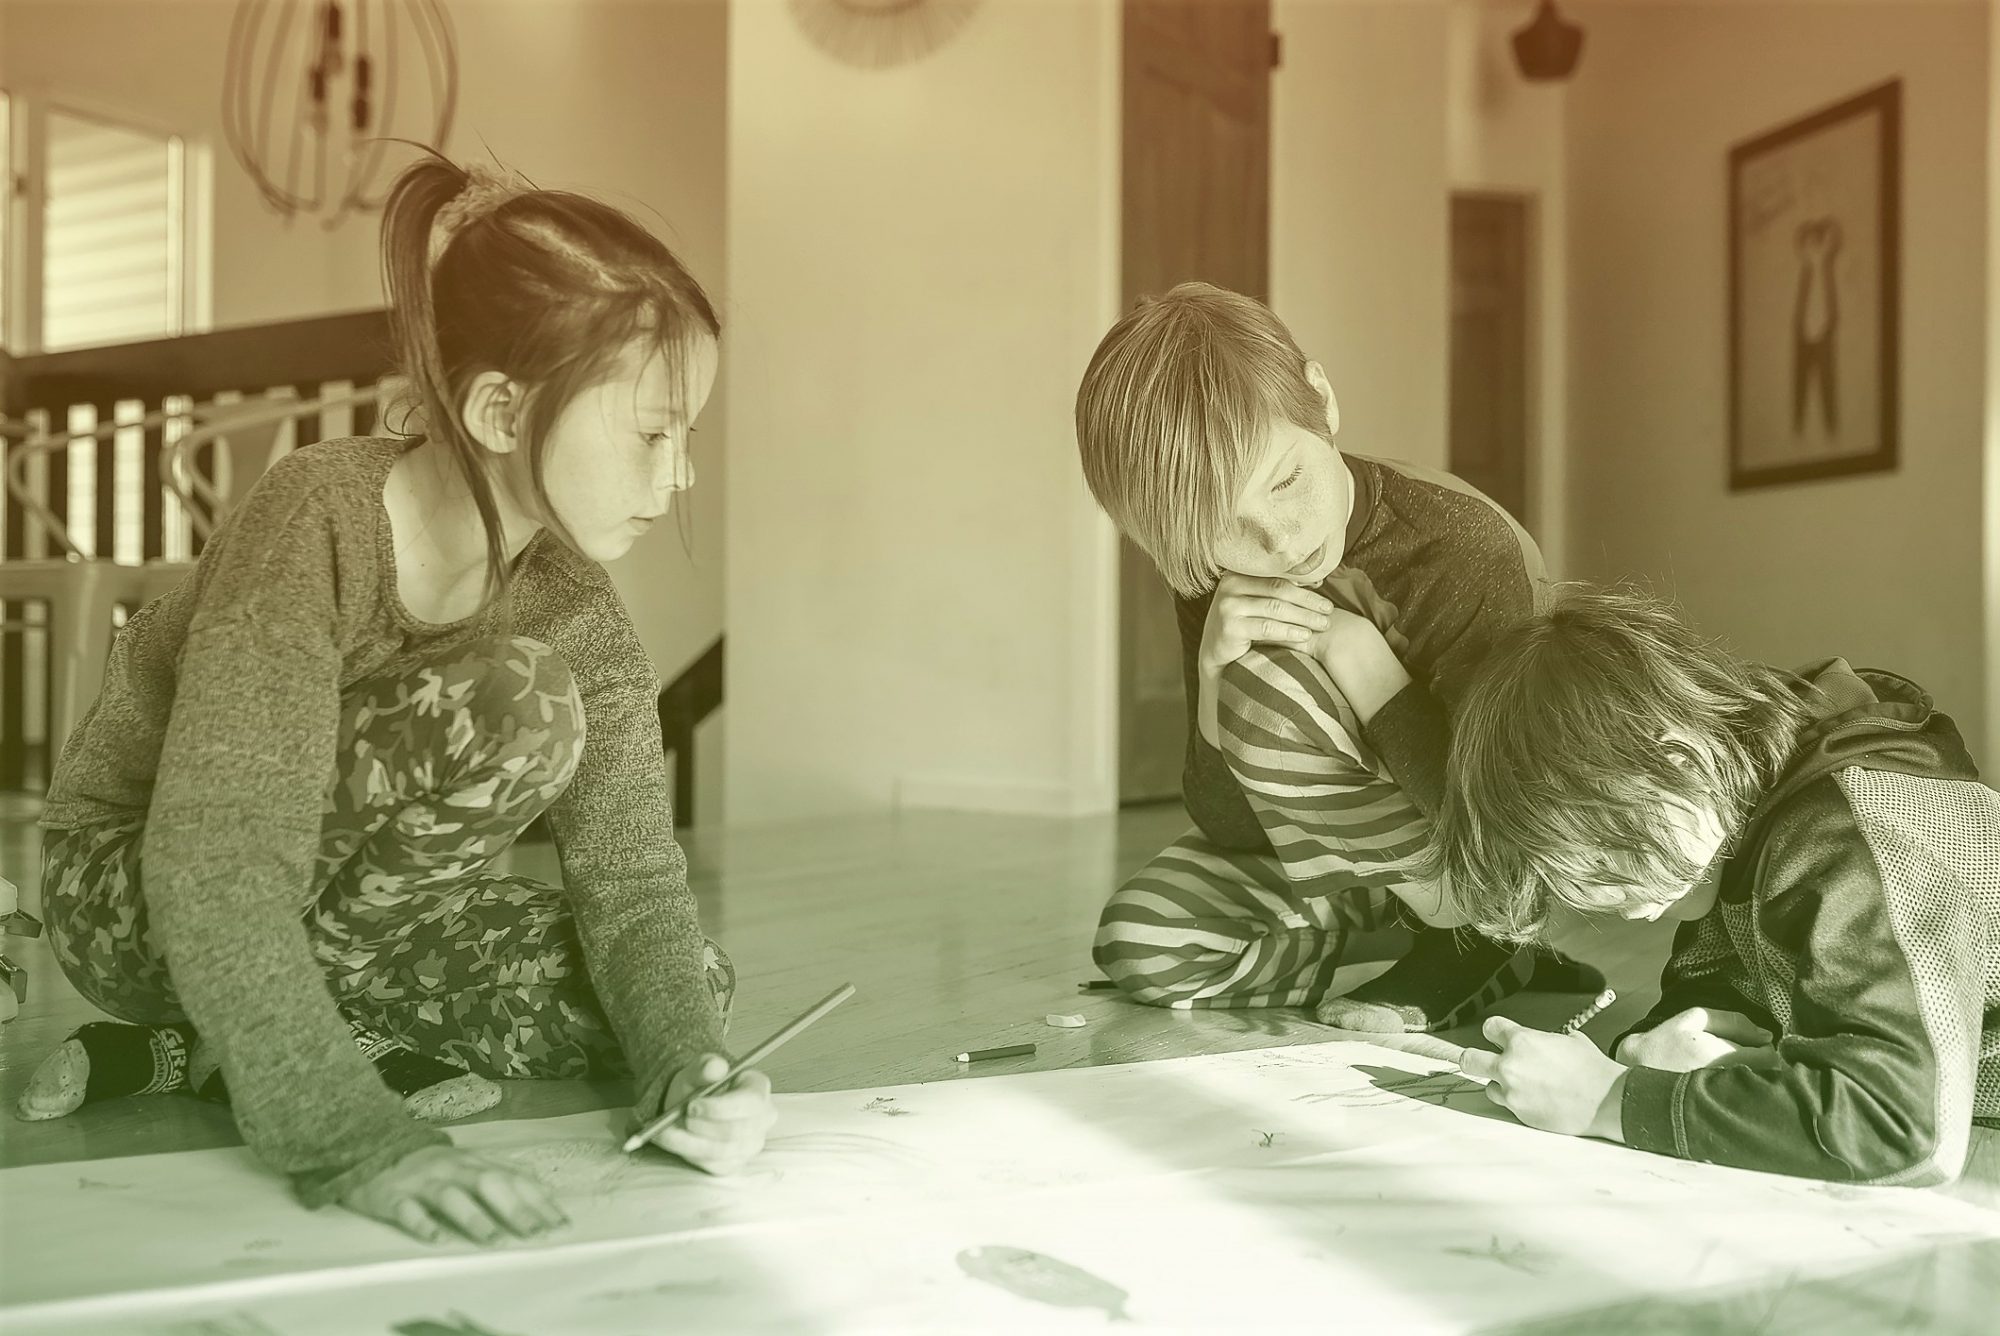 Three young children working on an art project at home